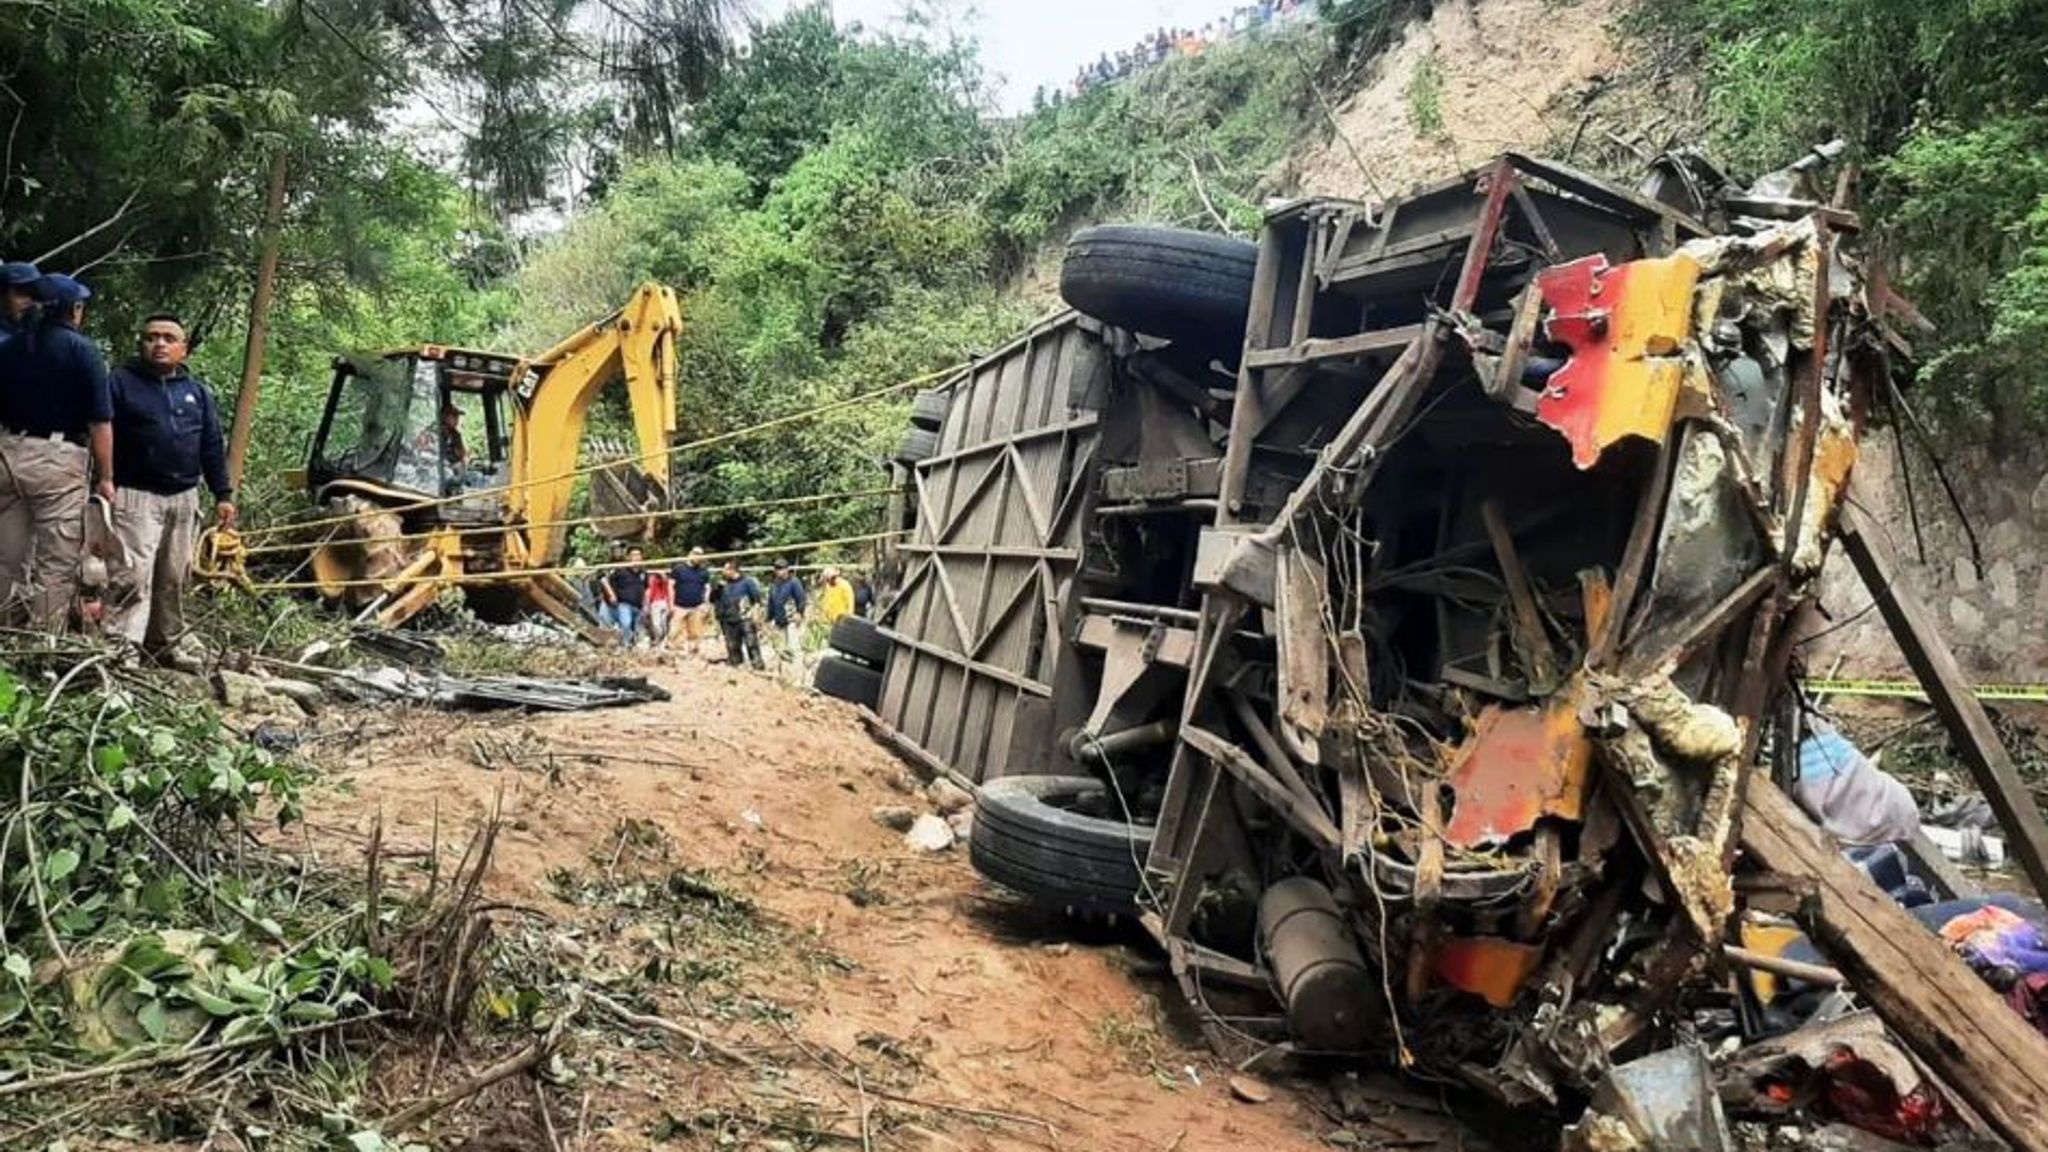 Mexico Bus Accident